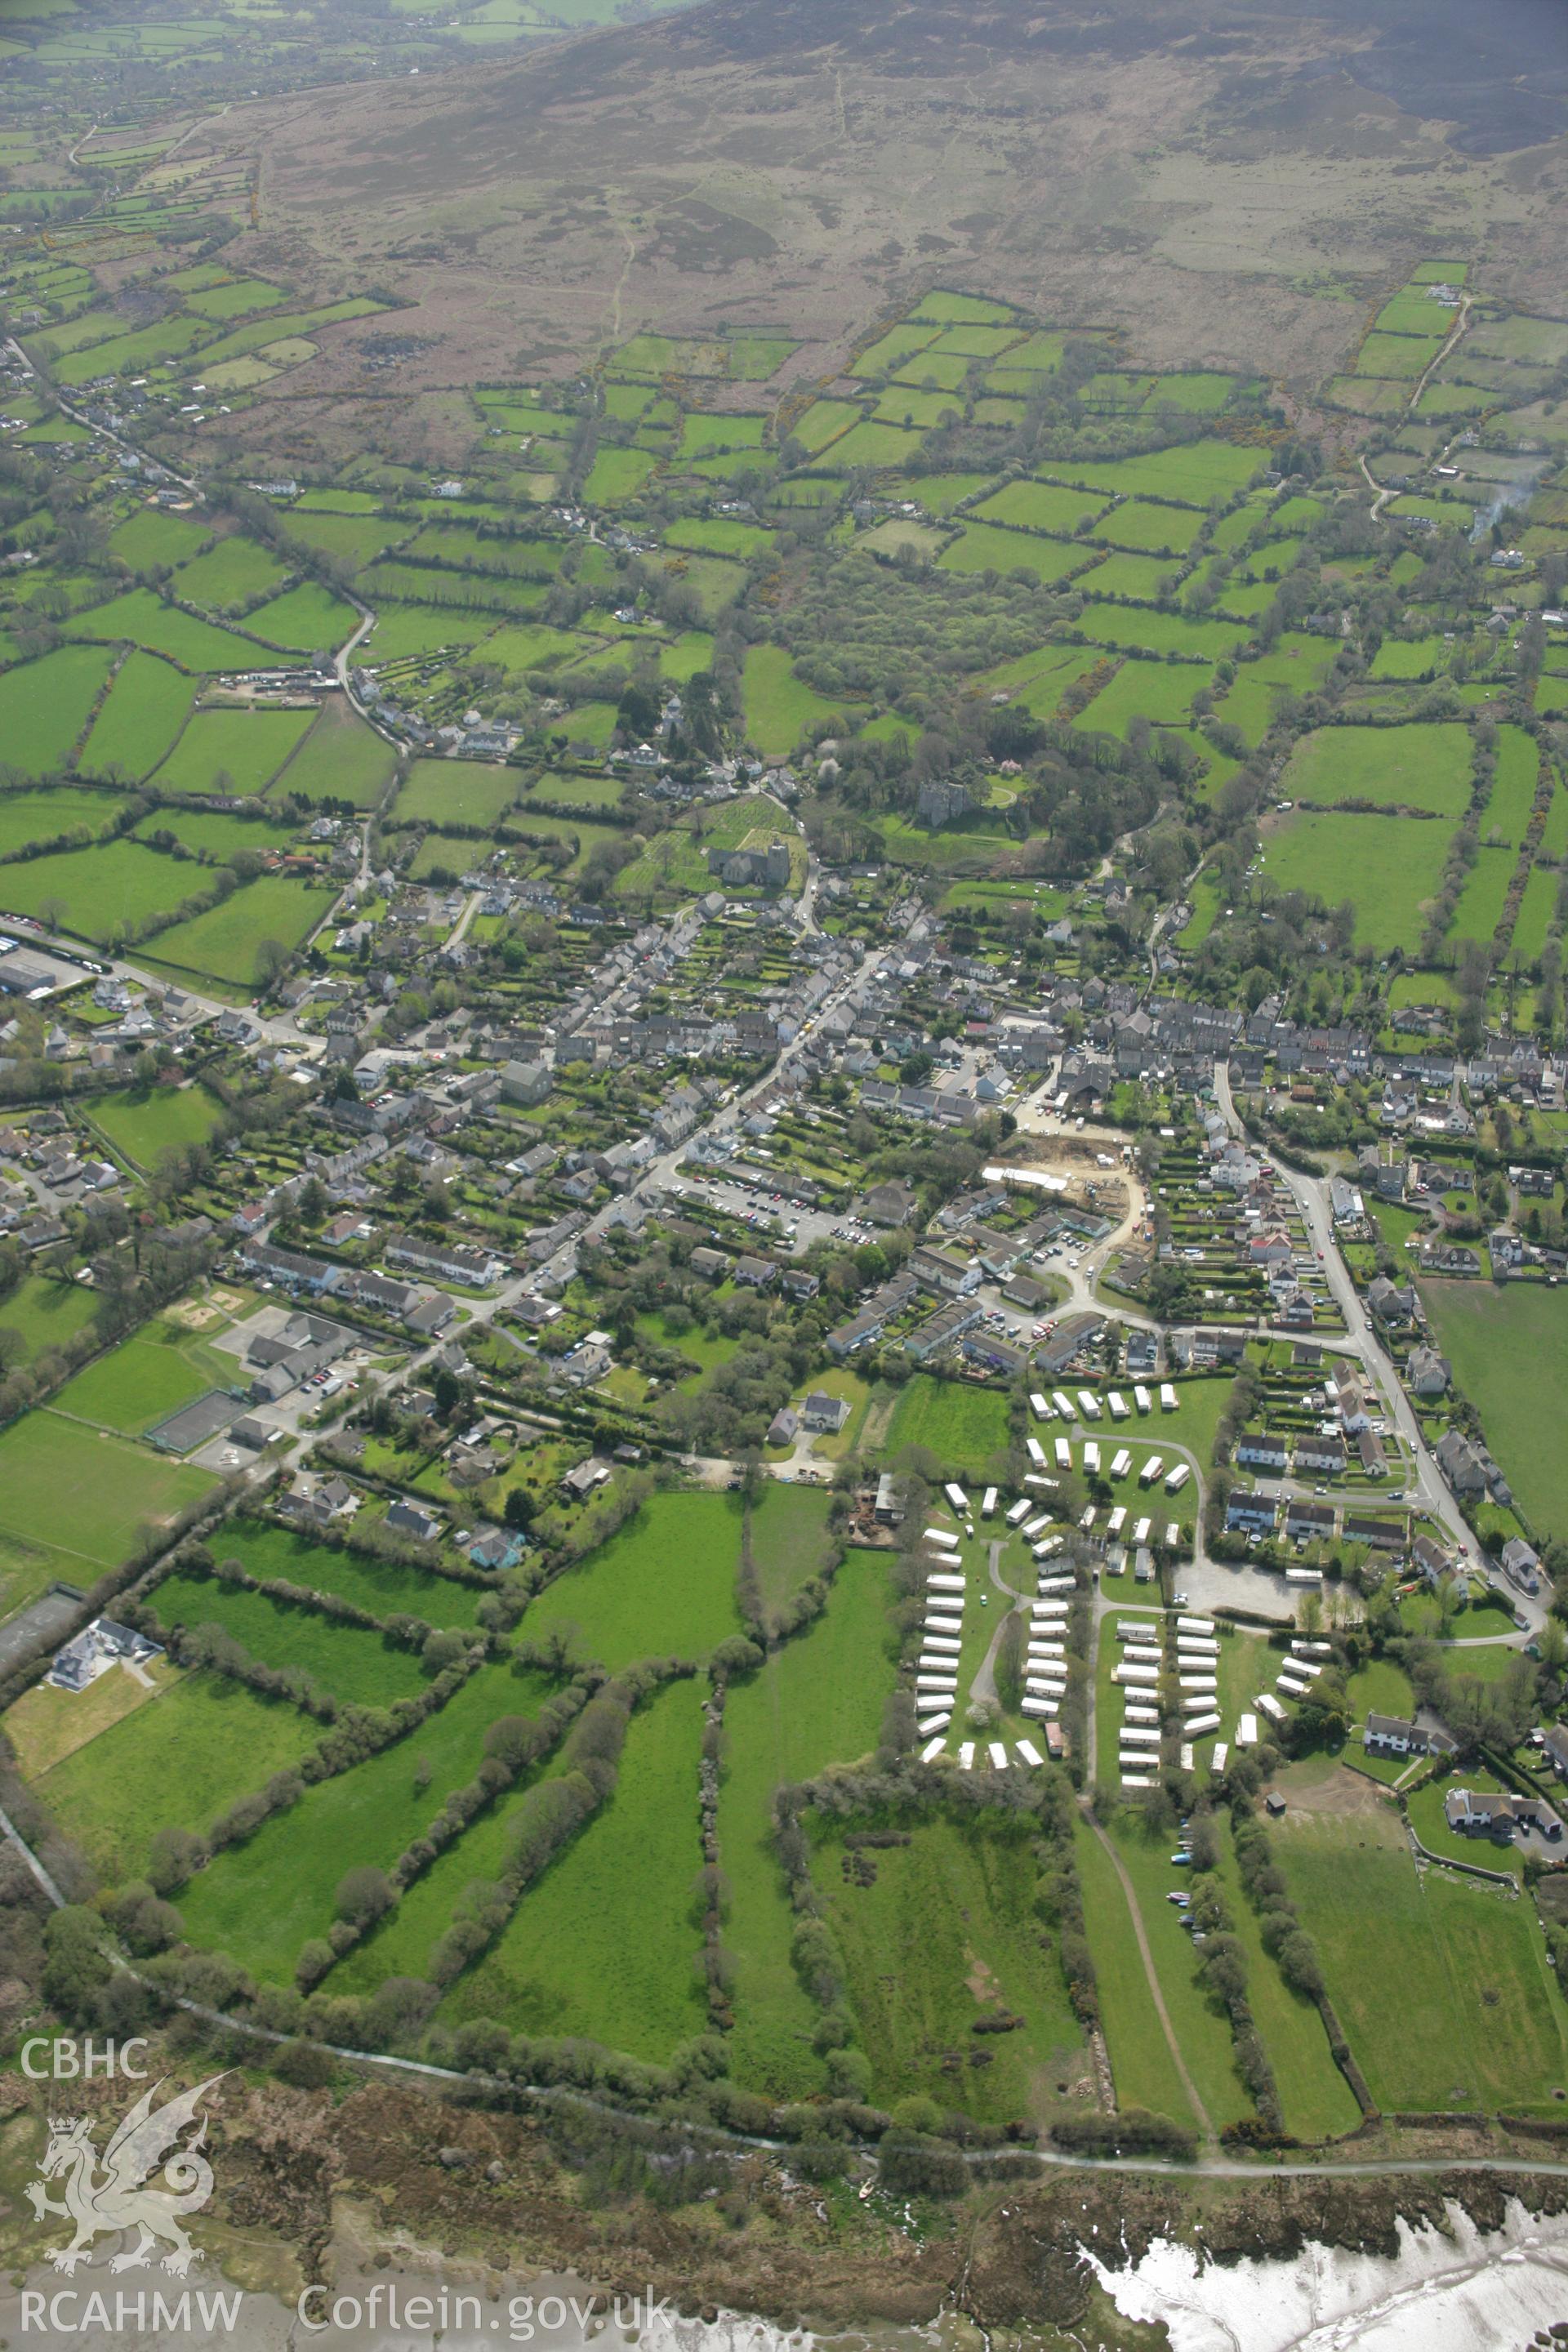 RCAHMW colour oblique aerial photograph showing view of town of Newport, Pembrokeshire. Taken on 17 April 2007 by Toby Driver